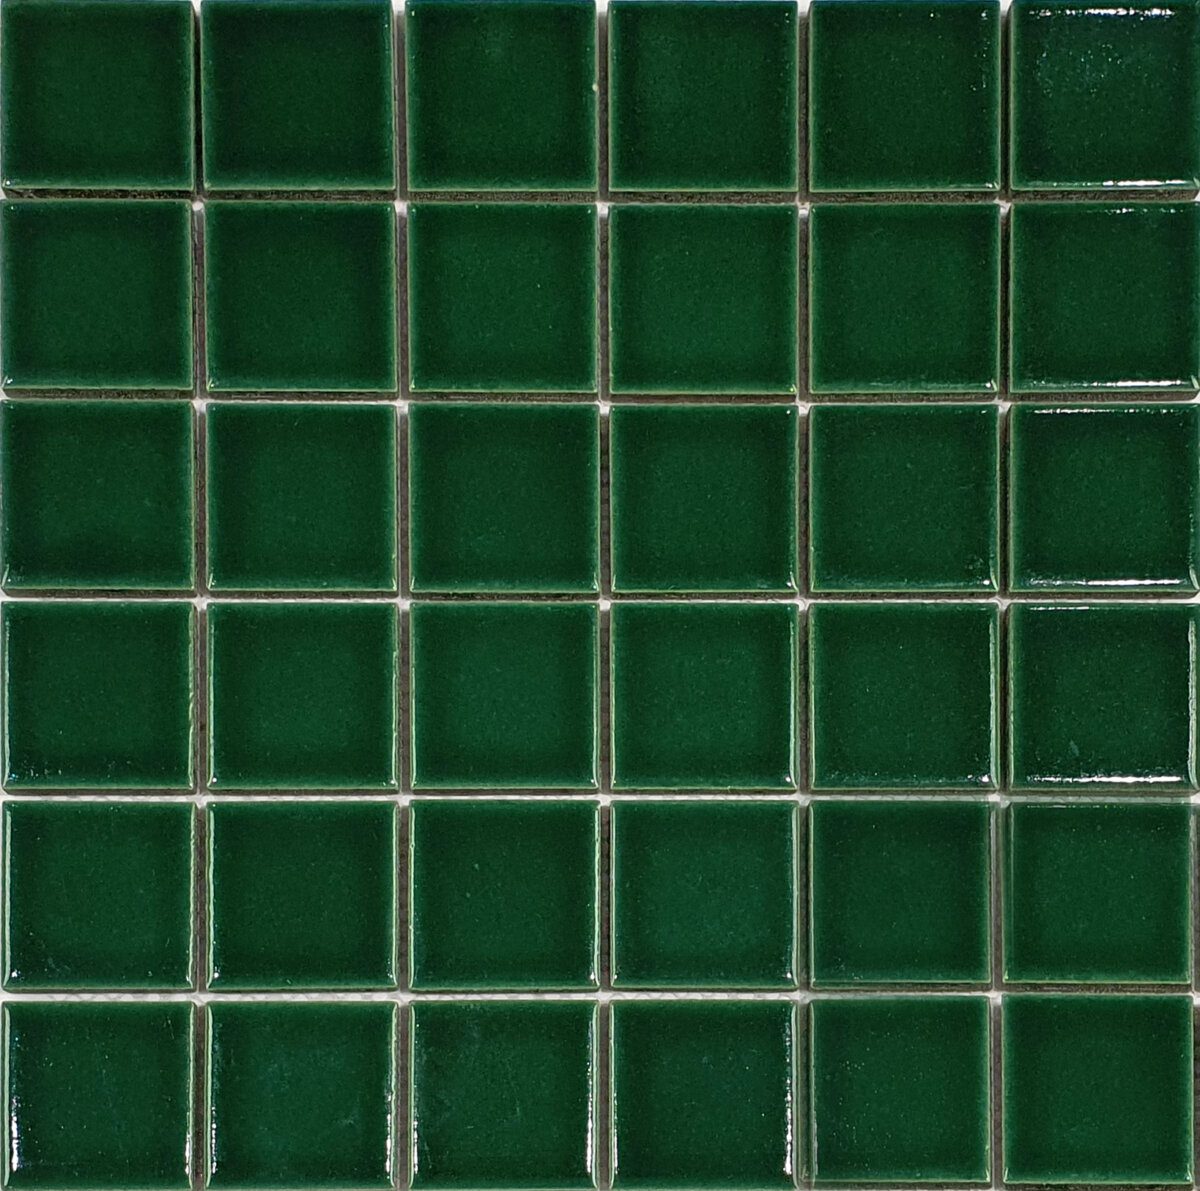 2251 DJ Piccolo City 48 Emerald Green Crackled 300x300mm_Stiles_Product_Image